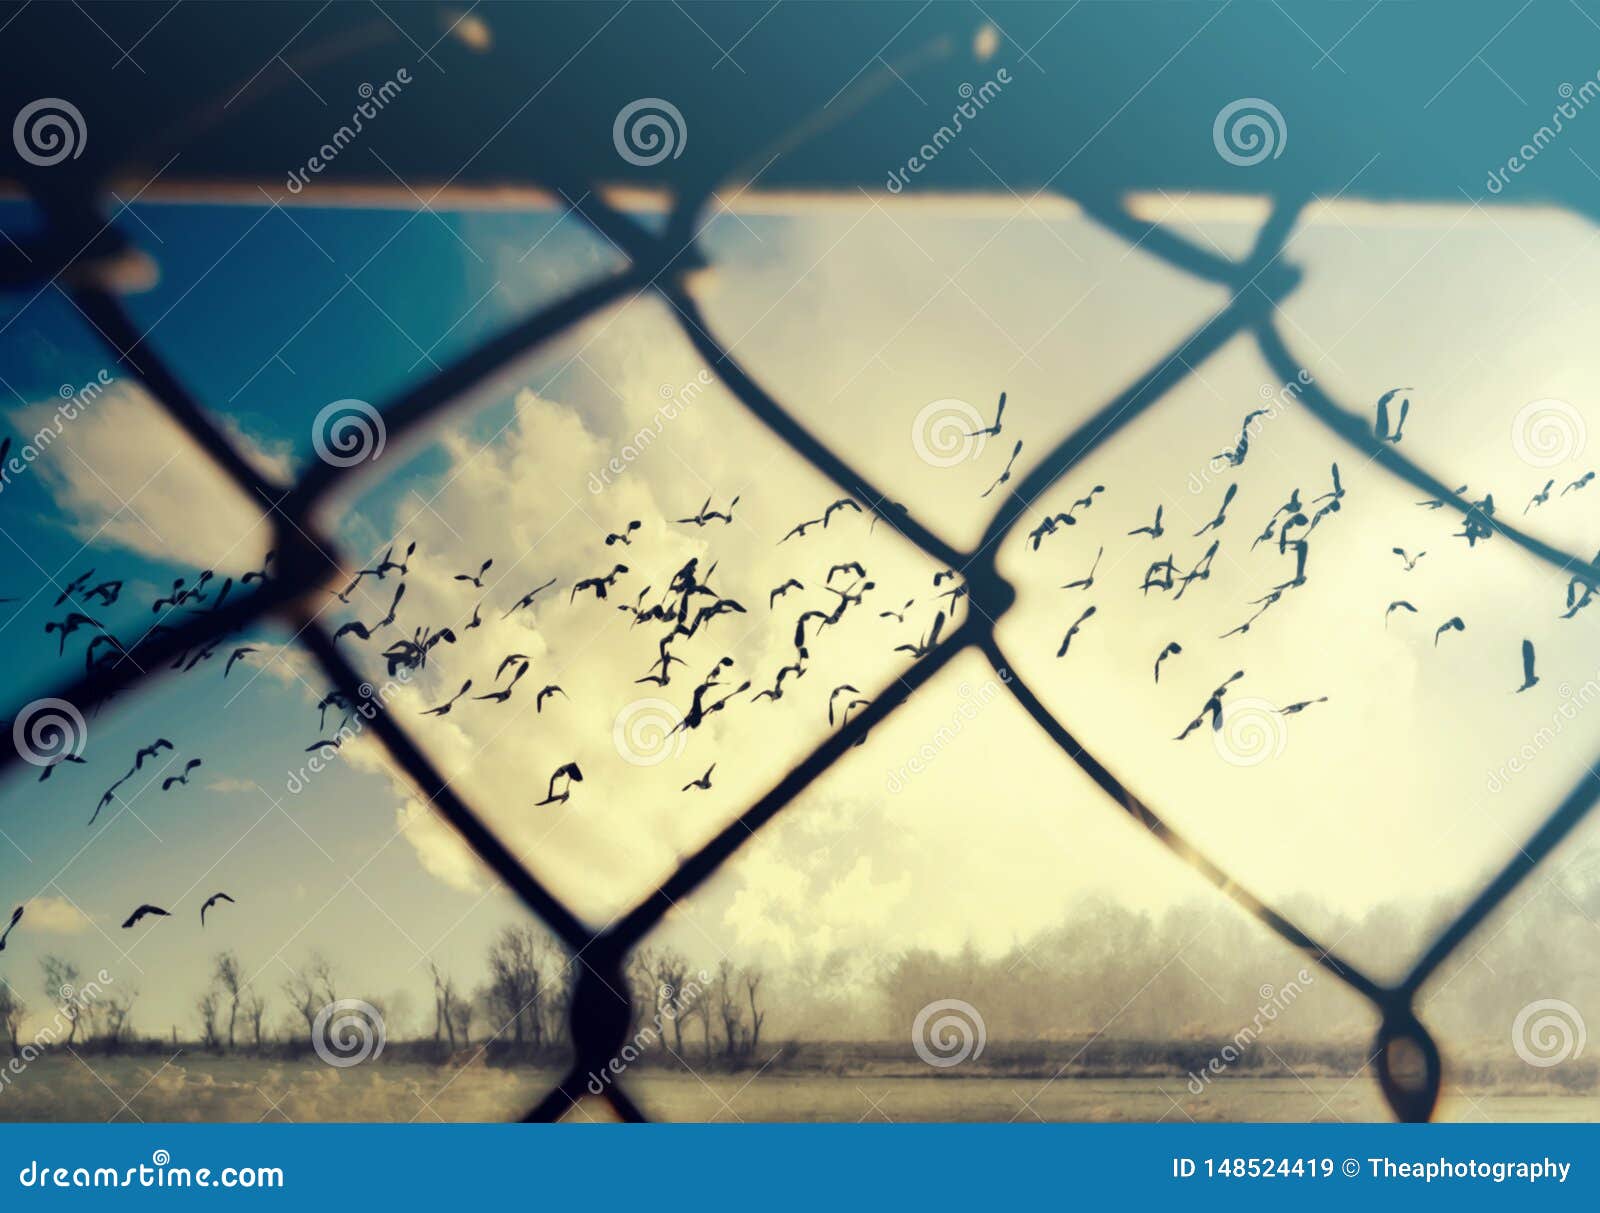 Freedom Concept. Birds Flying Behind A Steel Wire Mesh Stock Image ...
